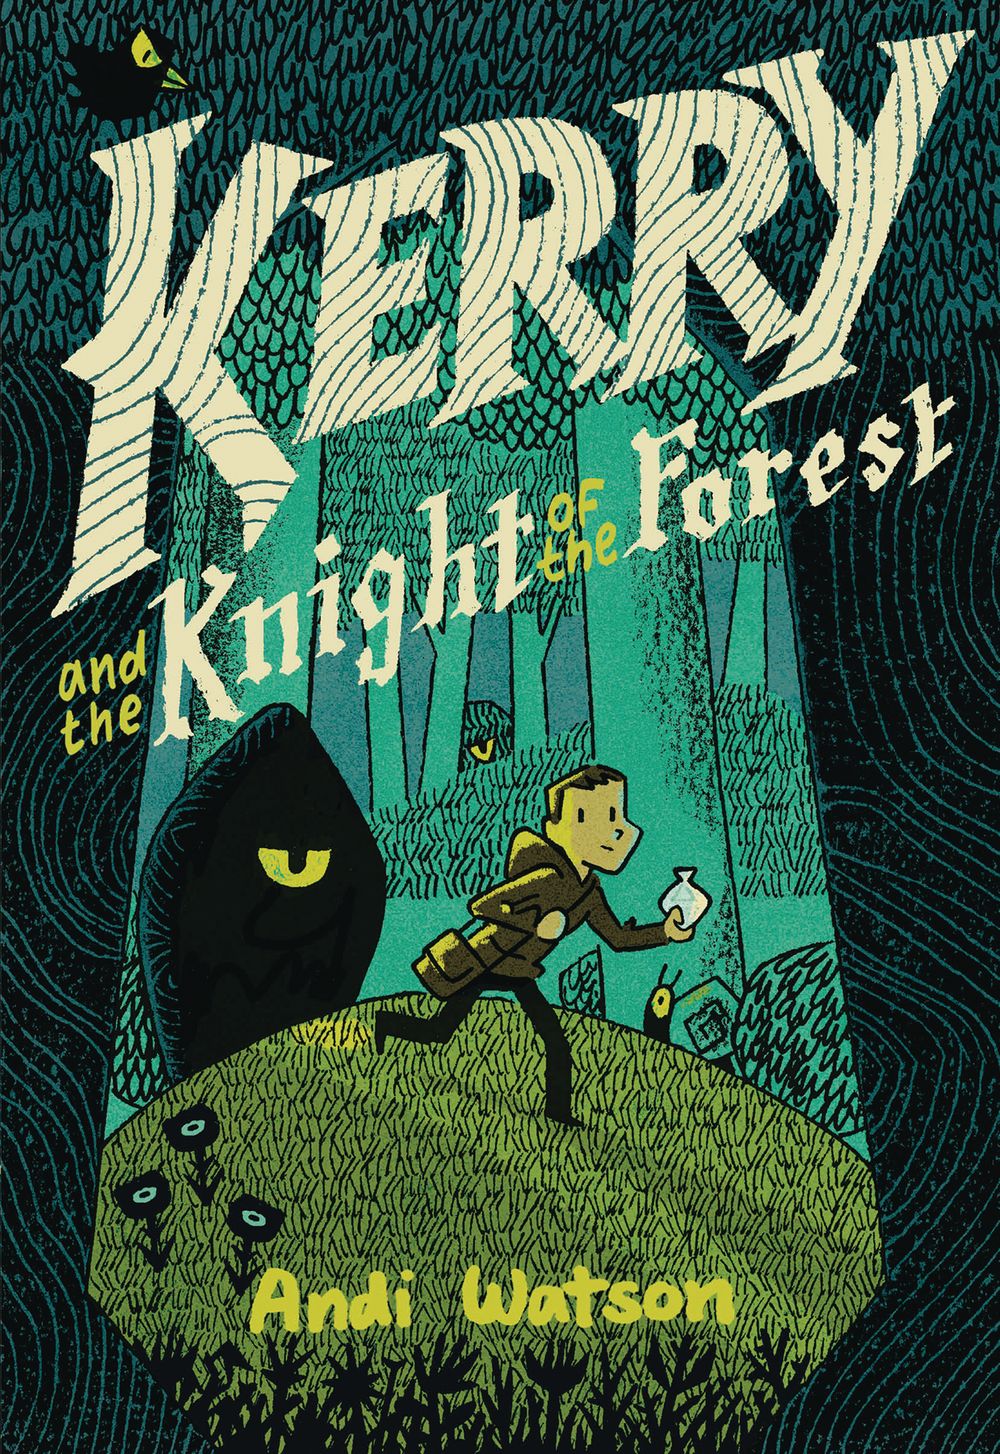 Kerry and Knight of the Forest GN